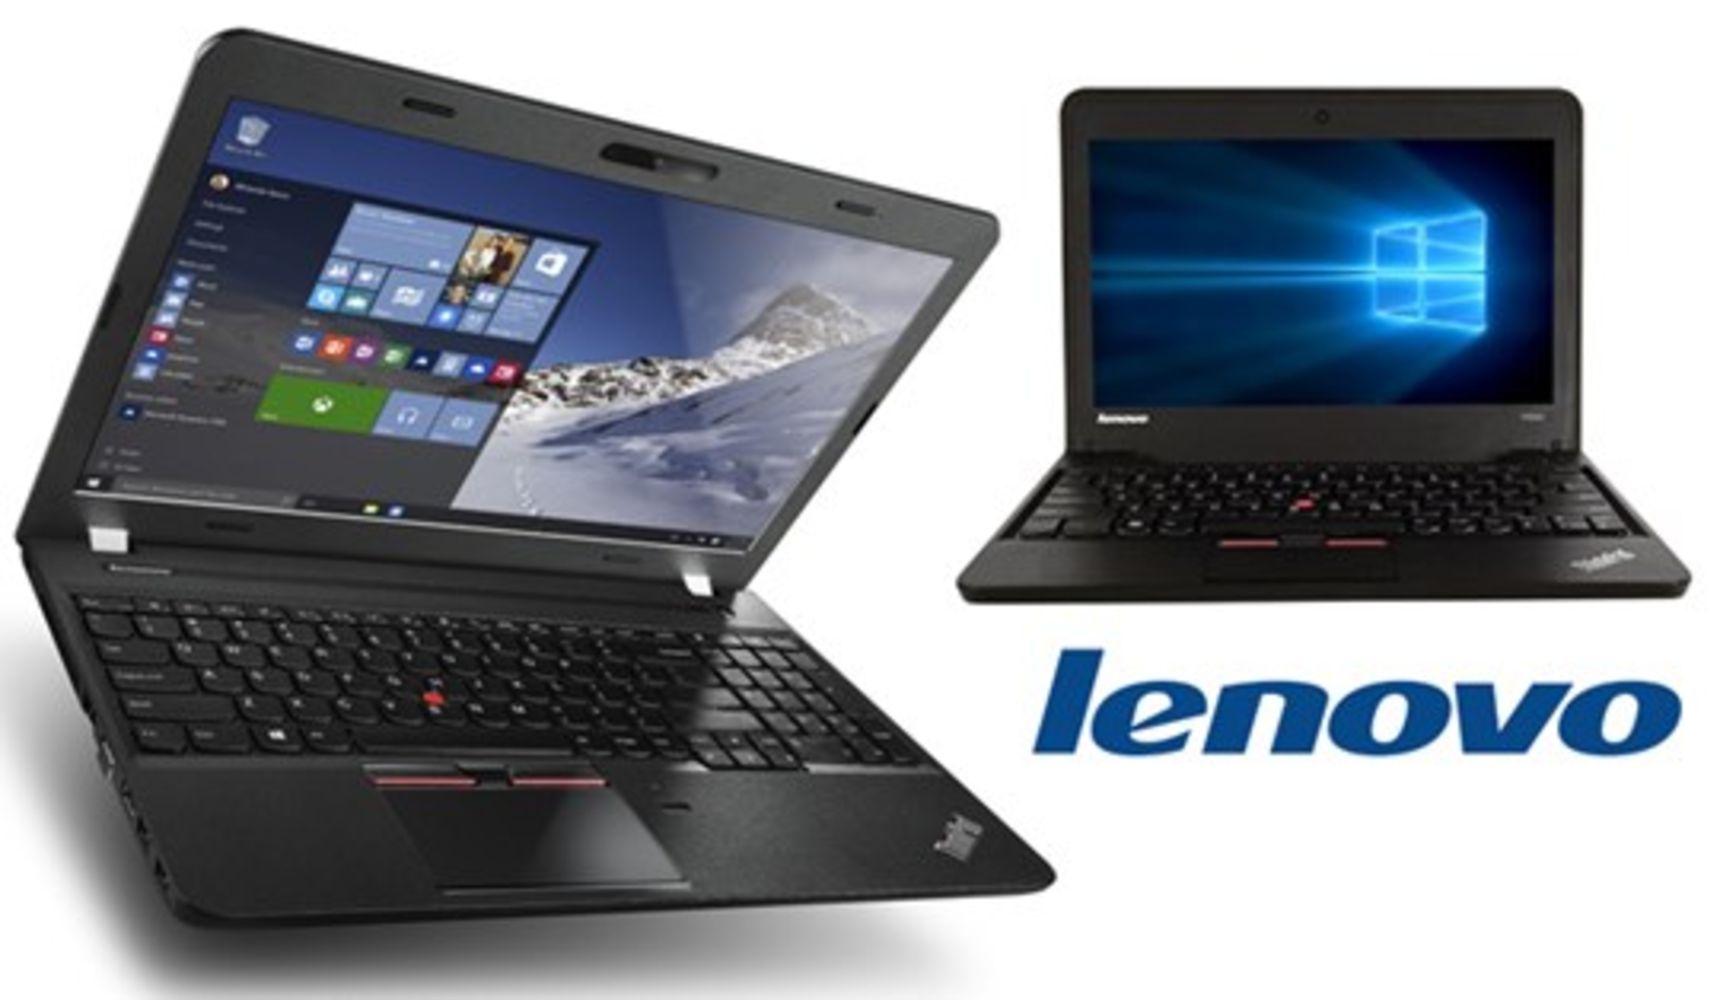 Massive Liquidation Of Lenovo Laptops, Apple MacBook Pro's, Clearance Of Quadcopter's Bluetooth Speakers & Smart Devices